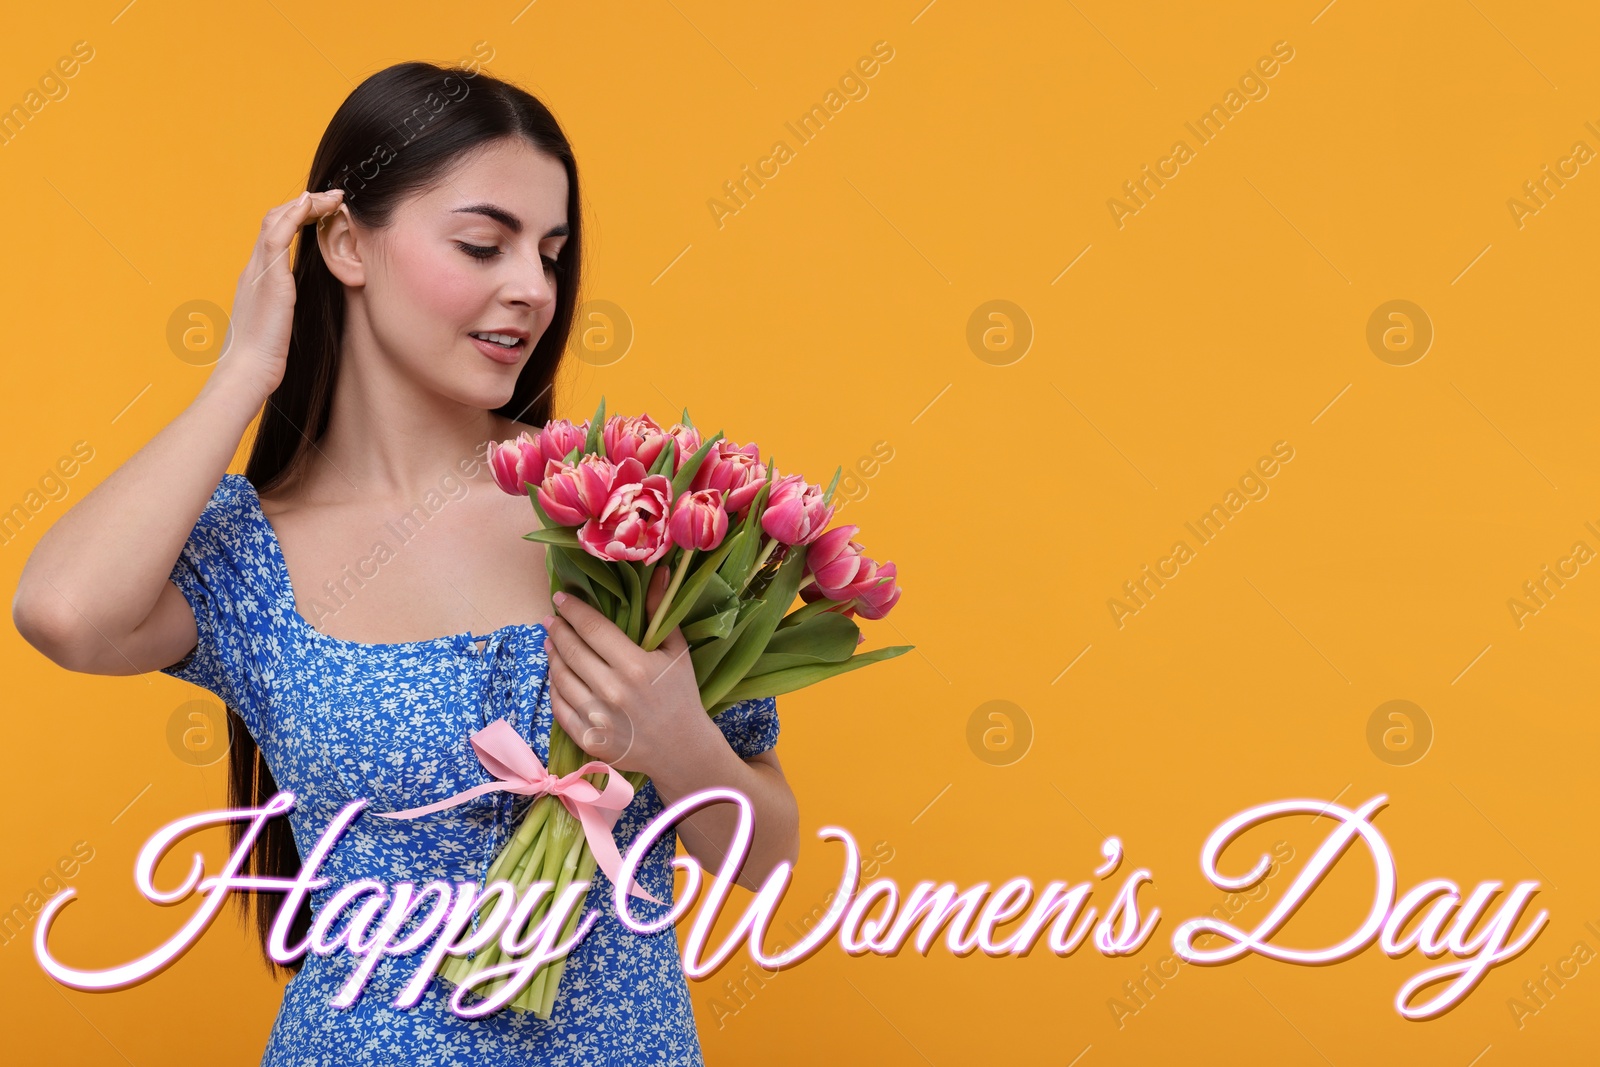 Image of Happy Women's Day - March 8. Attractive lady with bouquet of tulips on orange background